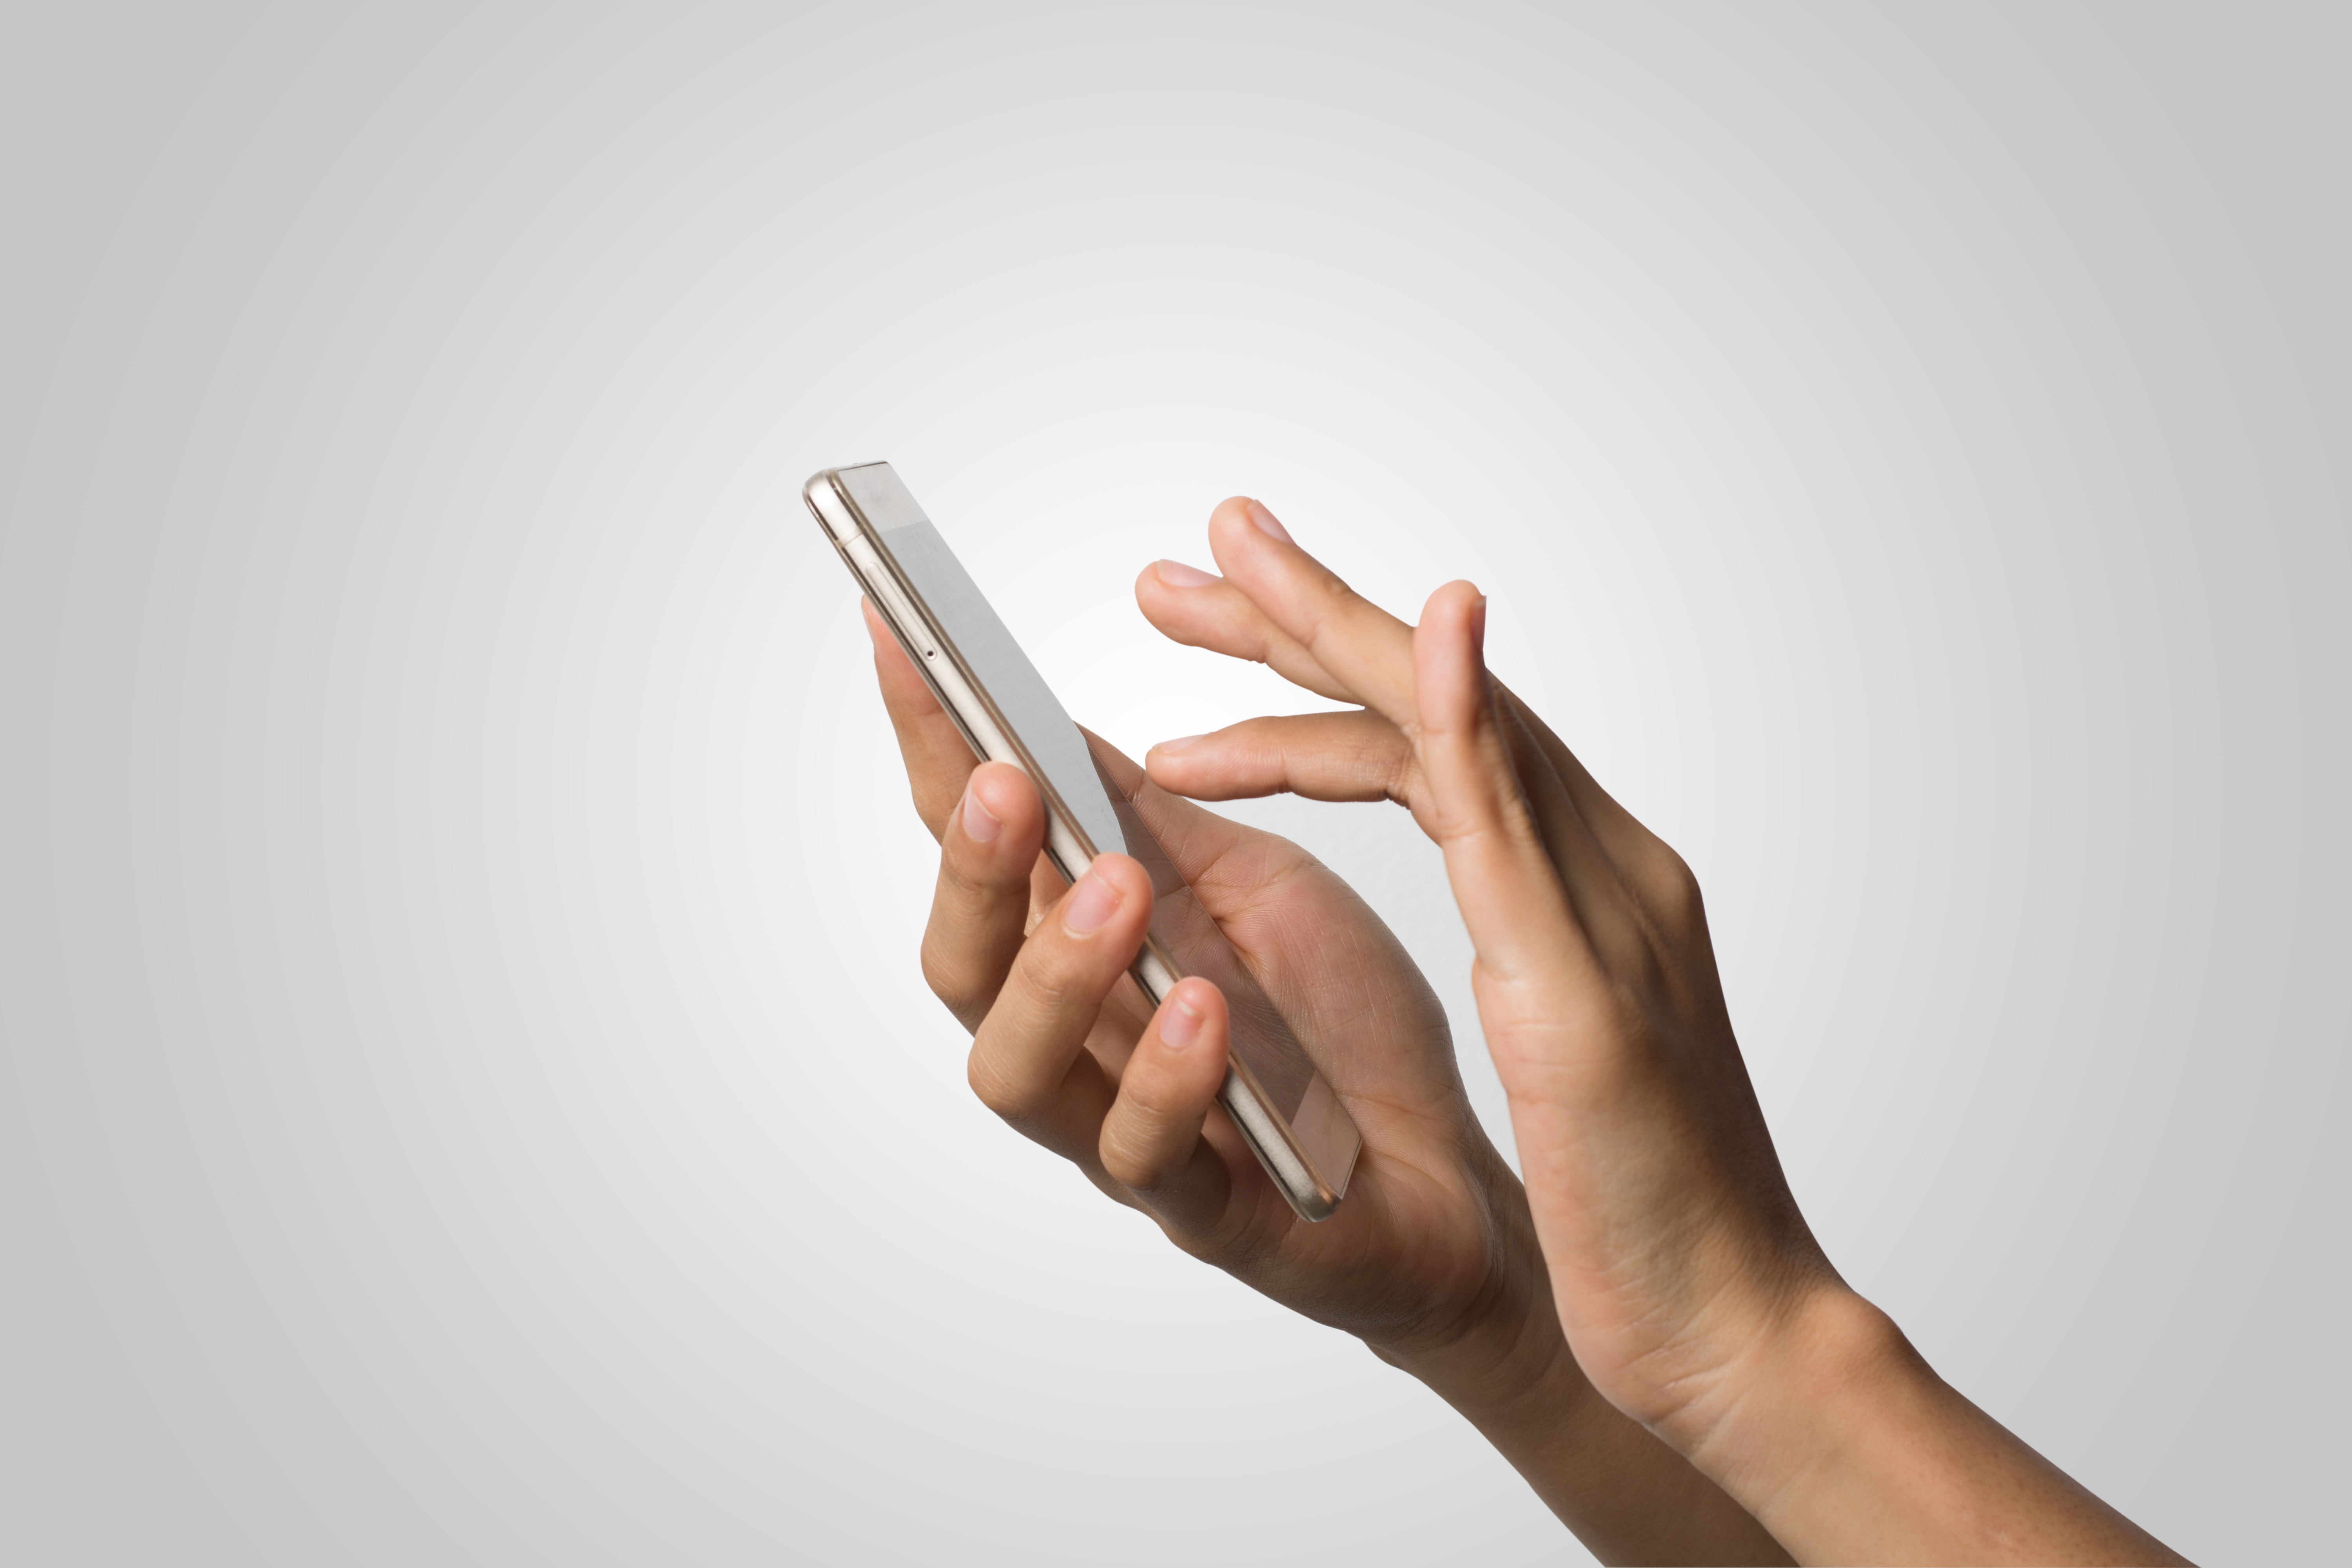 woman-hand-holding-smart-phone-blank-screen-copy-space-hand-holding-smartphone-isolated-white-background.jpg